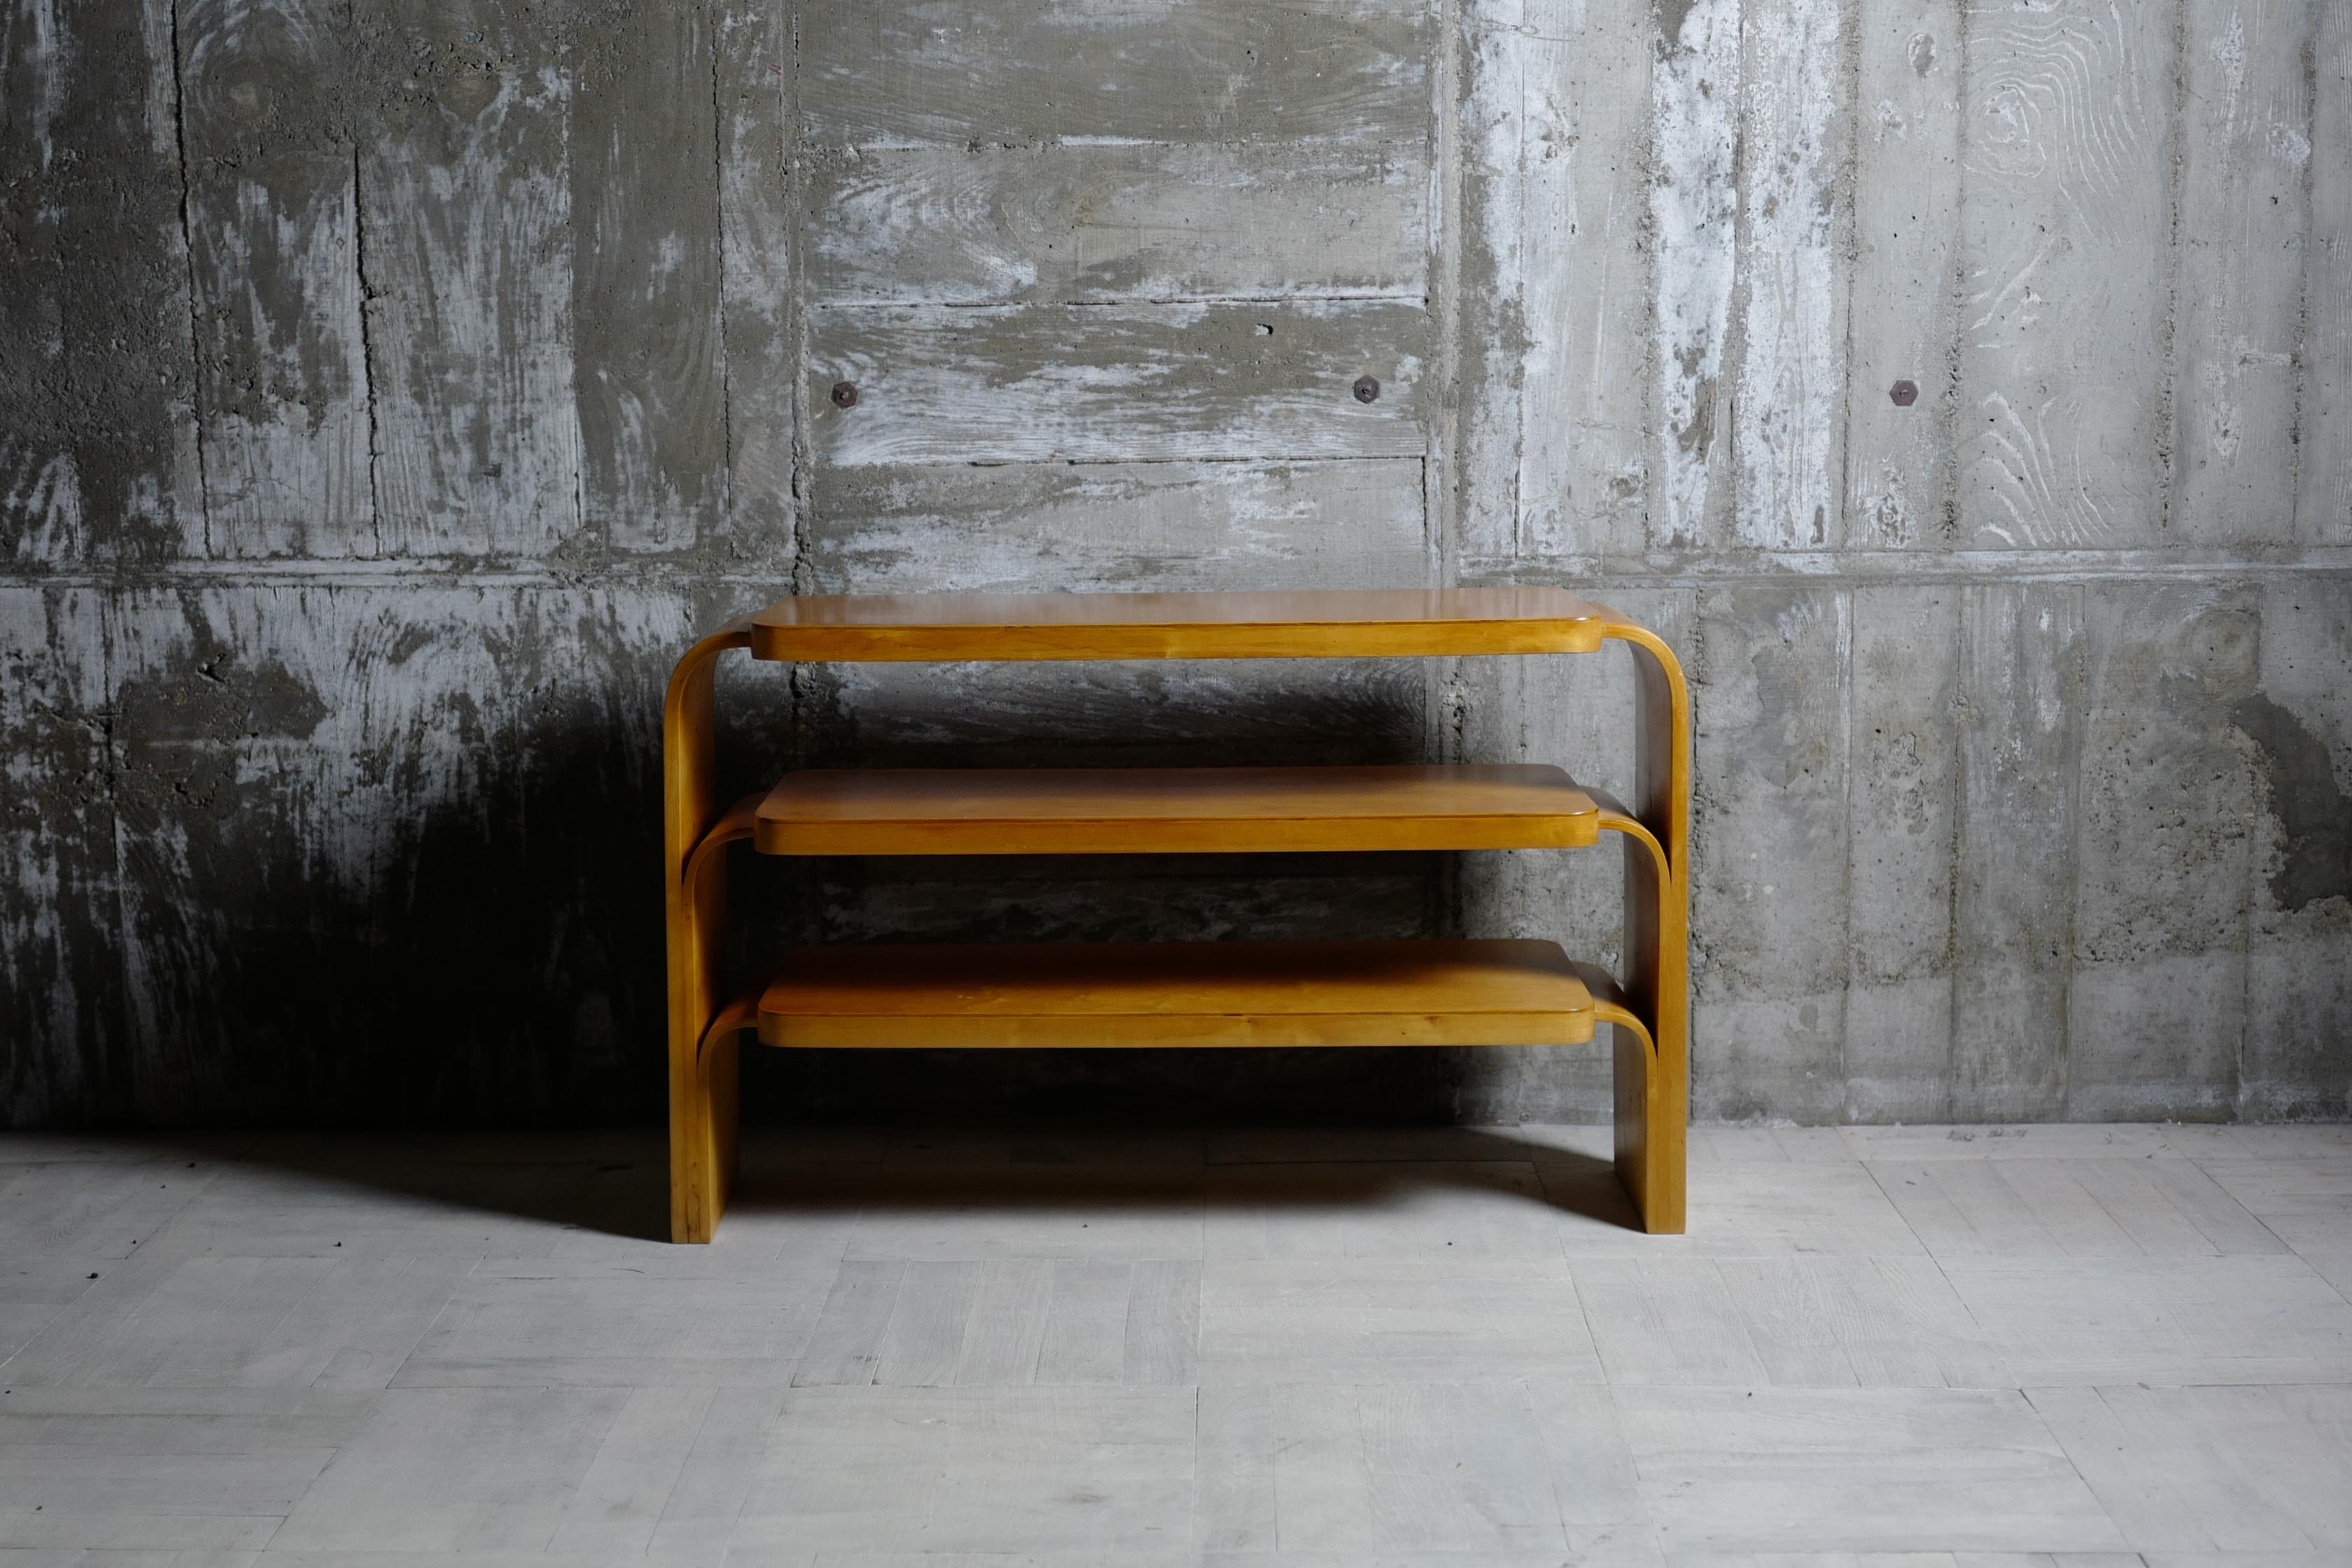 1940' alvar aalto design 111 shelf.
This is made in Hedemora for export to abroad aalto furnitures during WW2.
